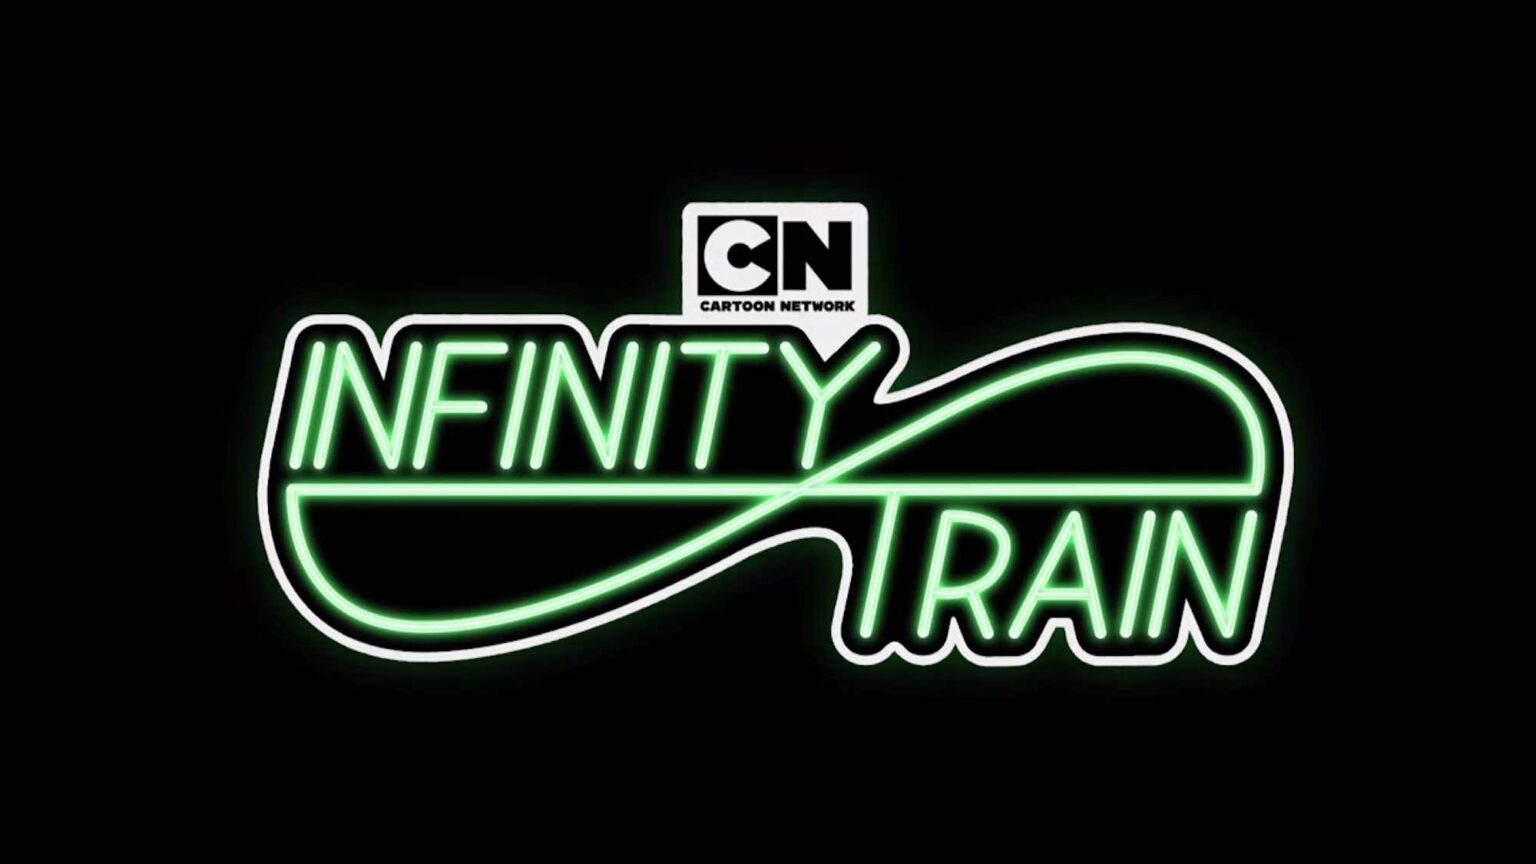 'Infinity Train' ends its run with book 4. Delve into the most memorable moments of the other books to say goodbye to the series.